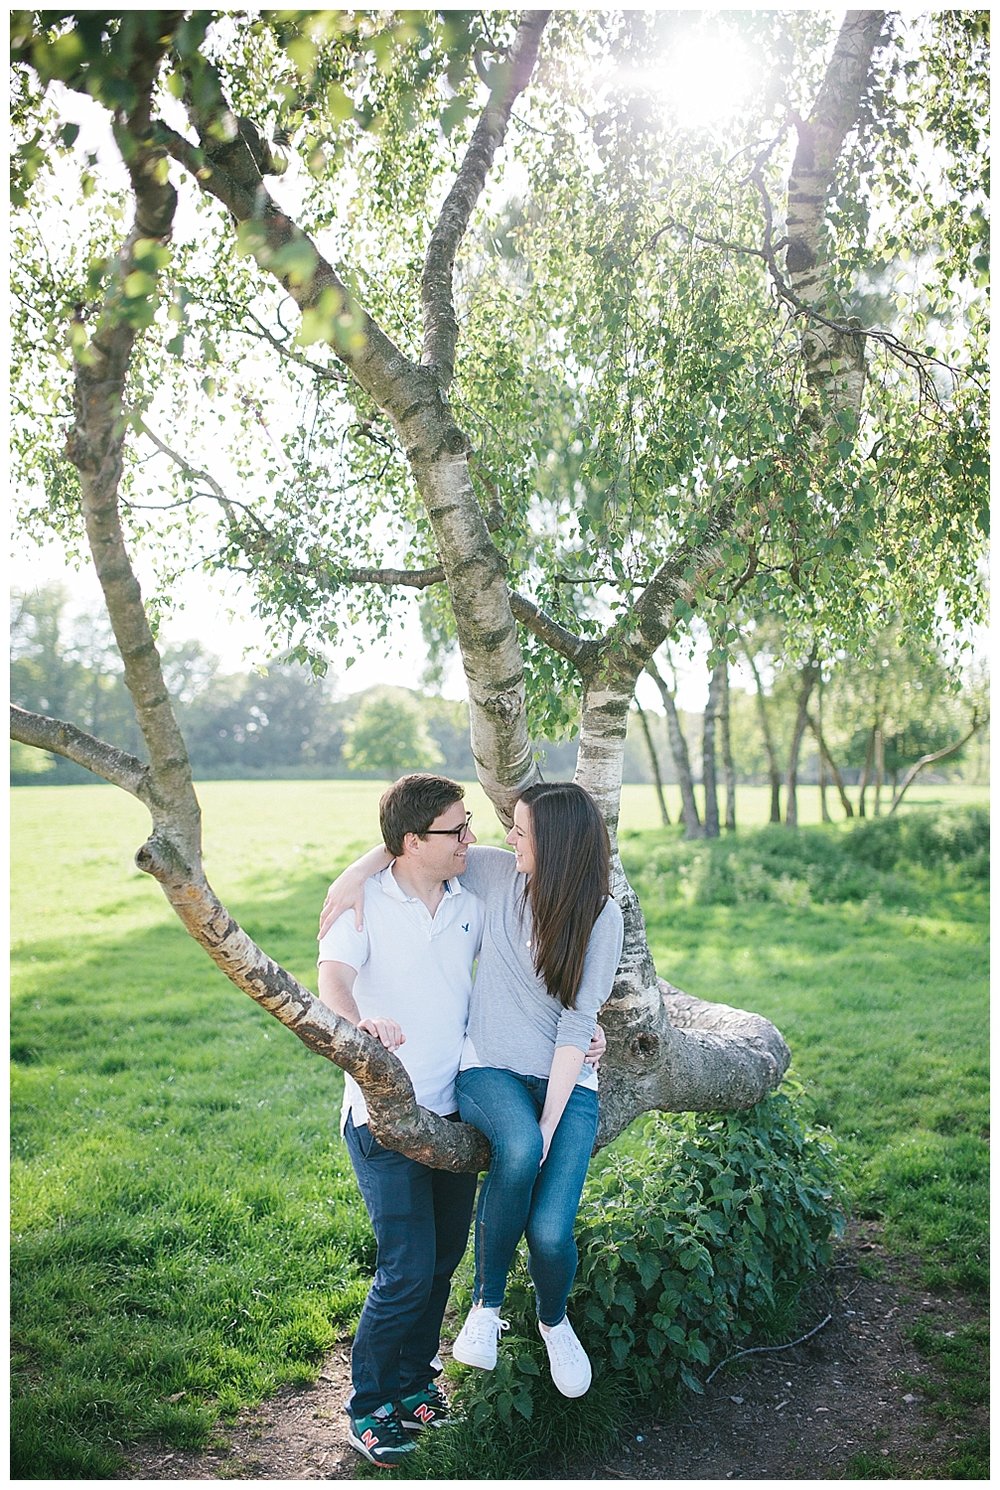  Engagement photography what to wear - cool blues and greys. 